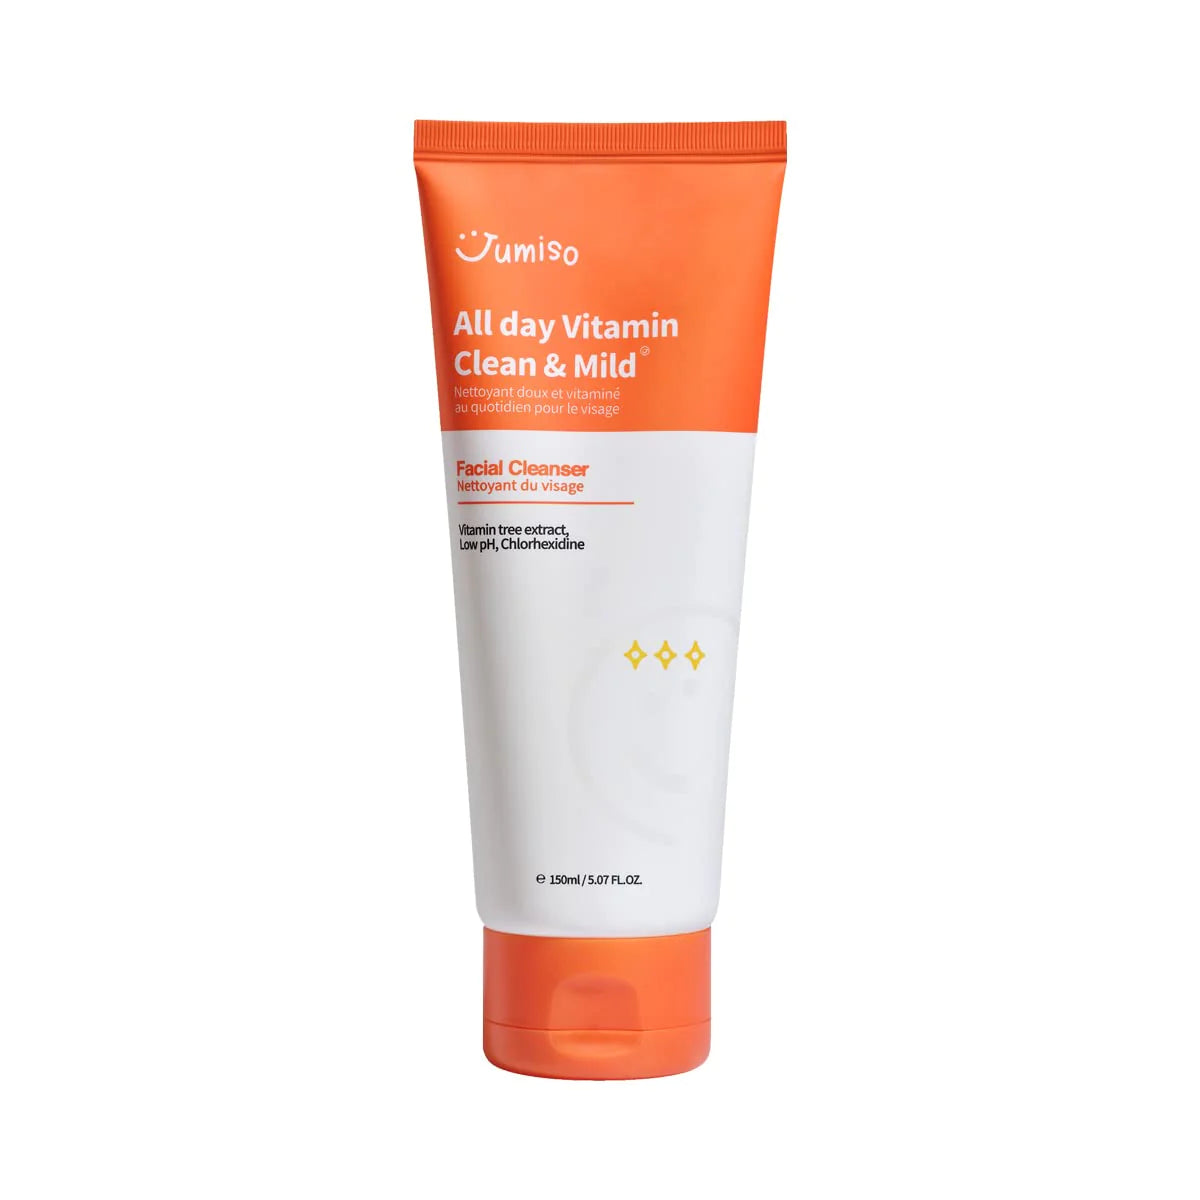 JUMISO - All Day Vitamin Clean & Mild Facial Cleanser (Discounted)